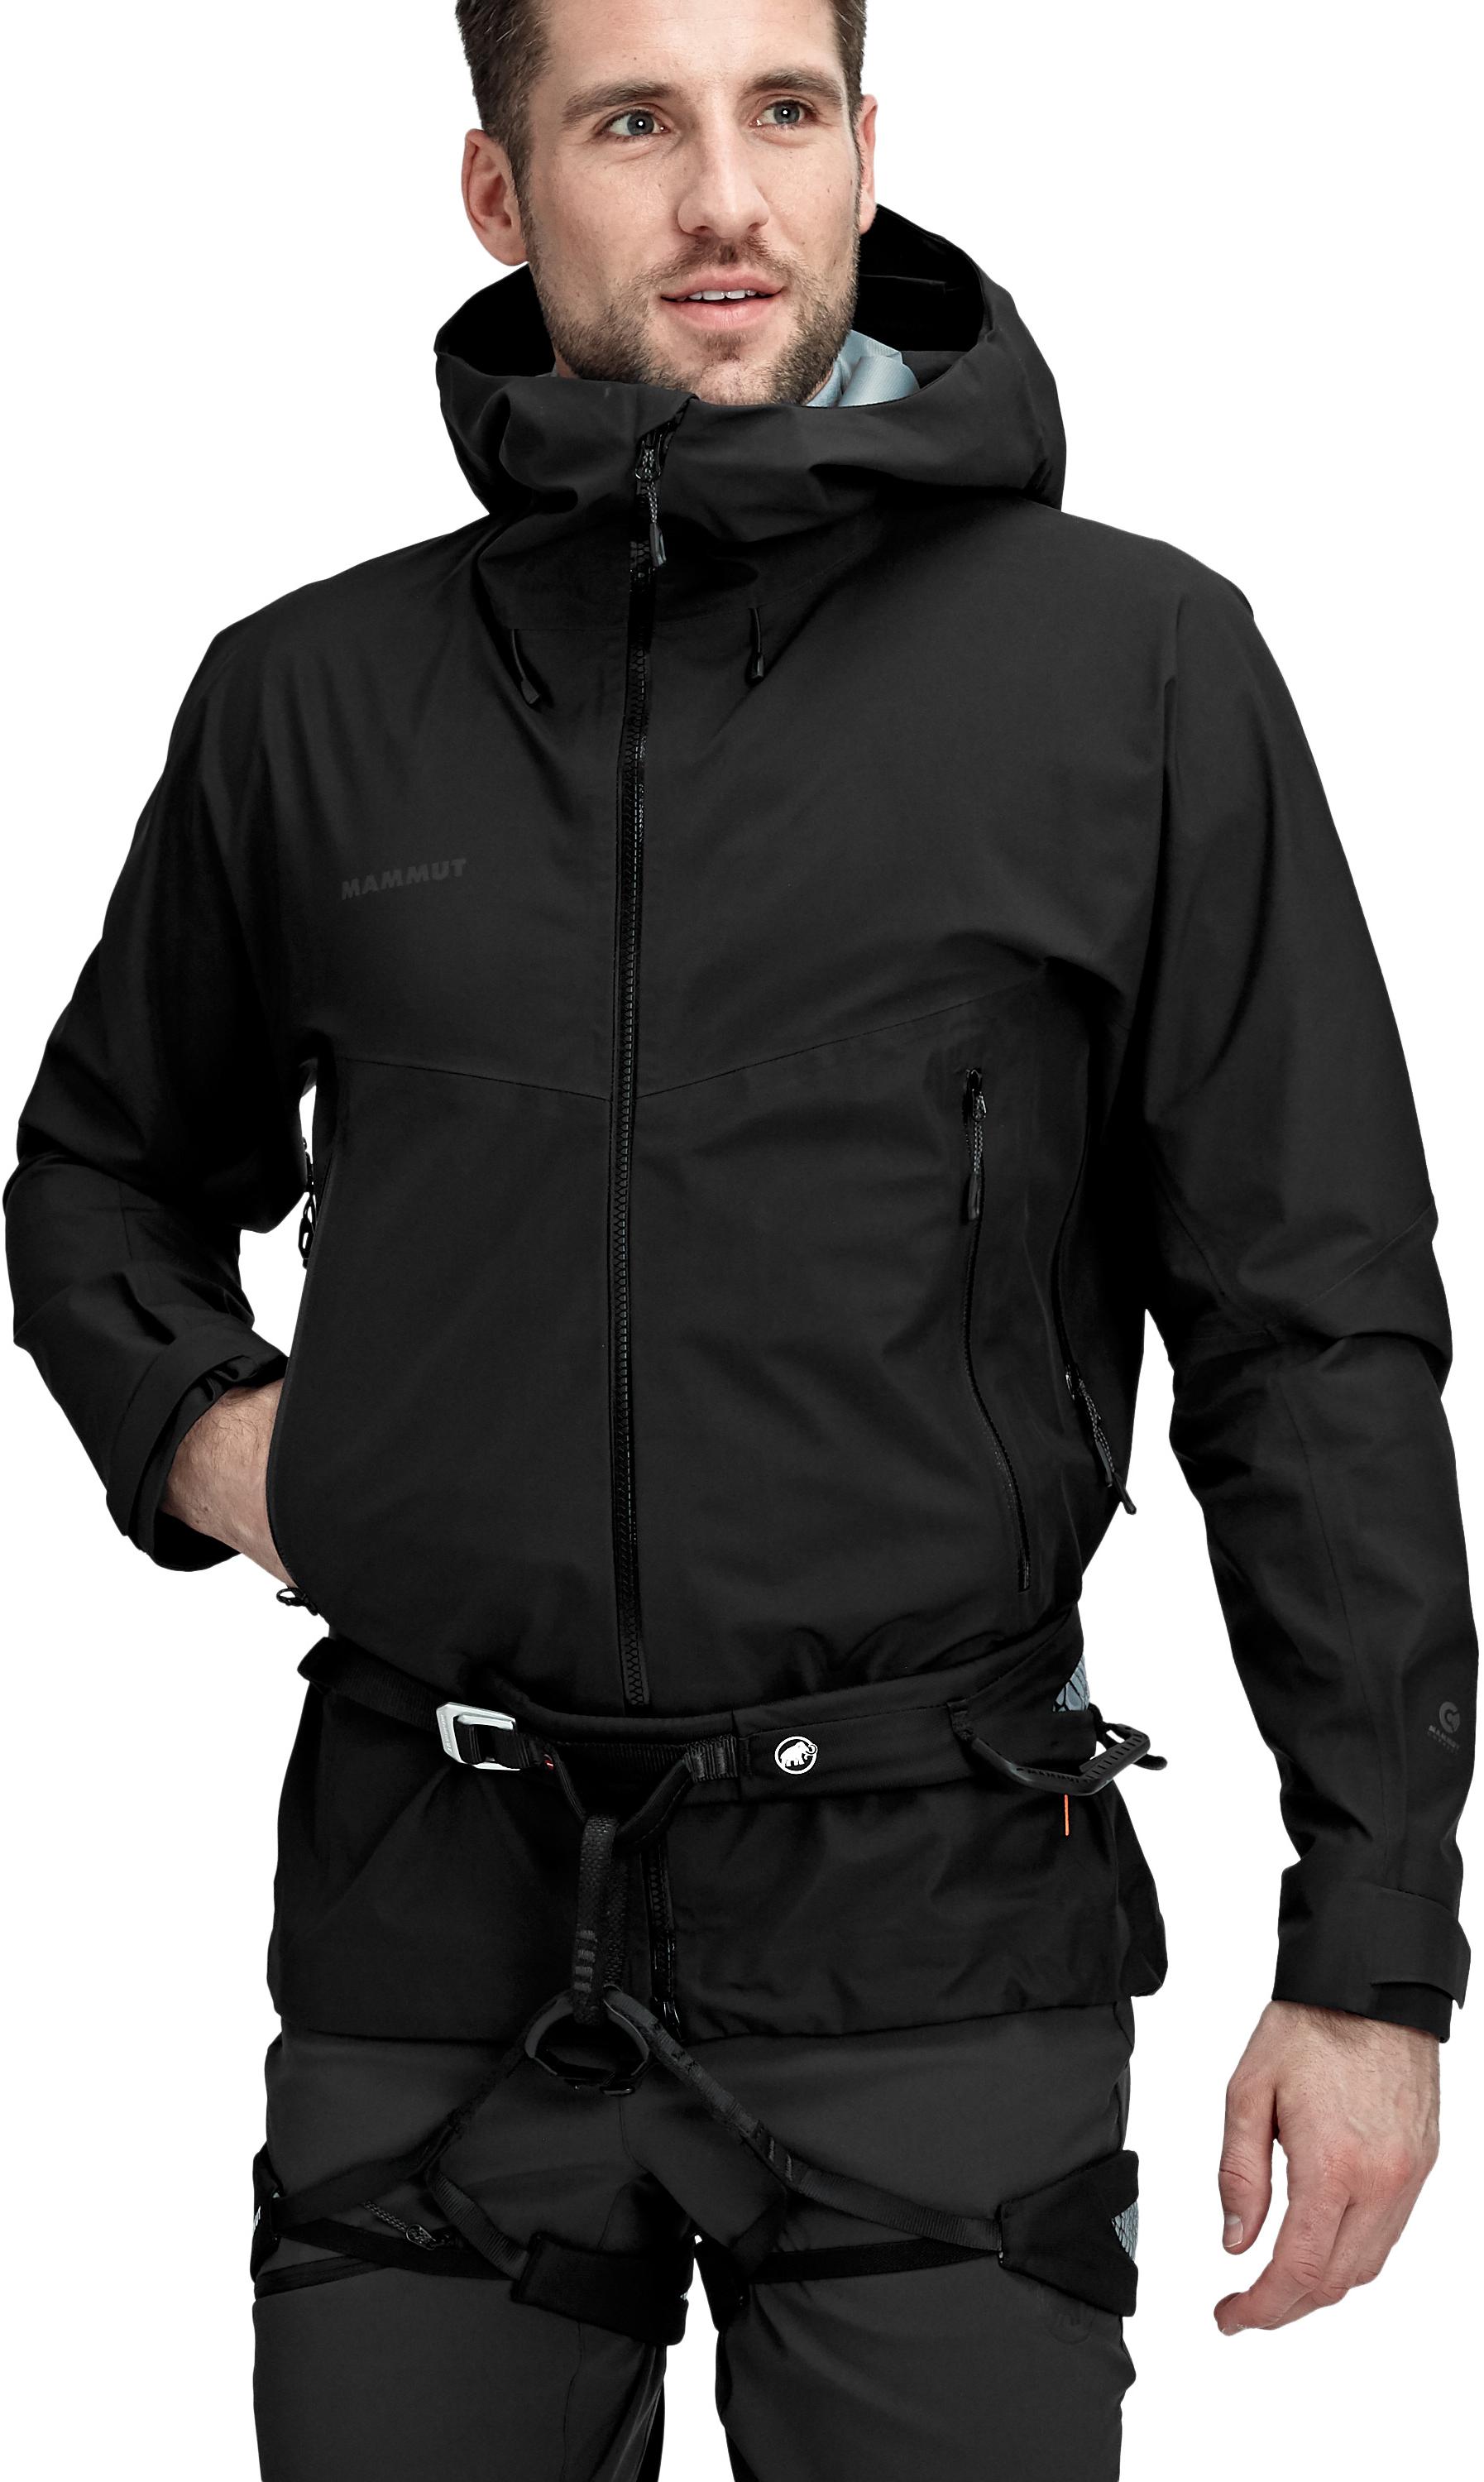 M's Crater HS Hooded Jacket